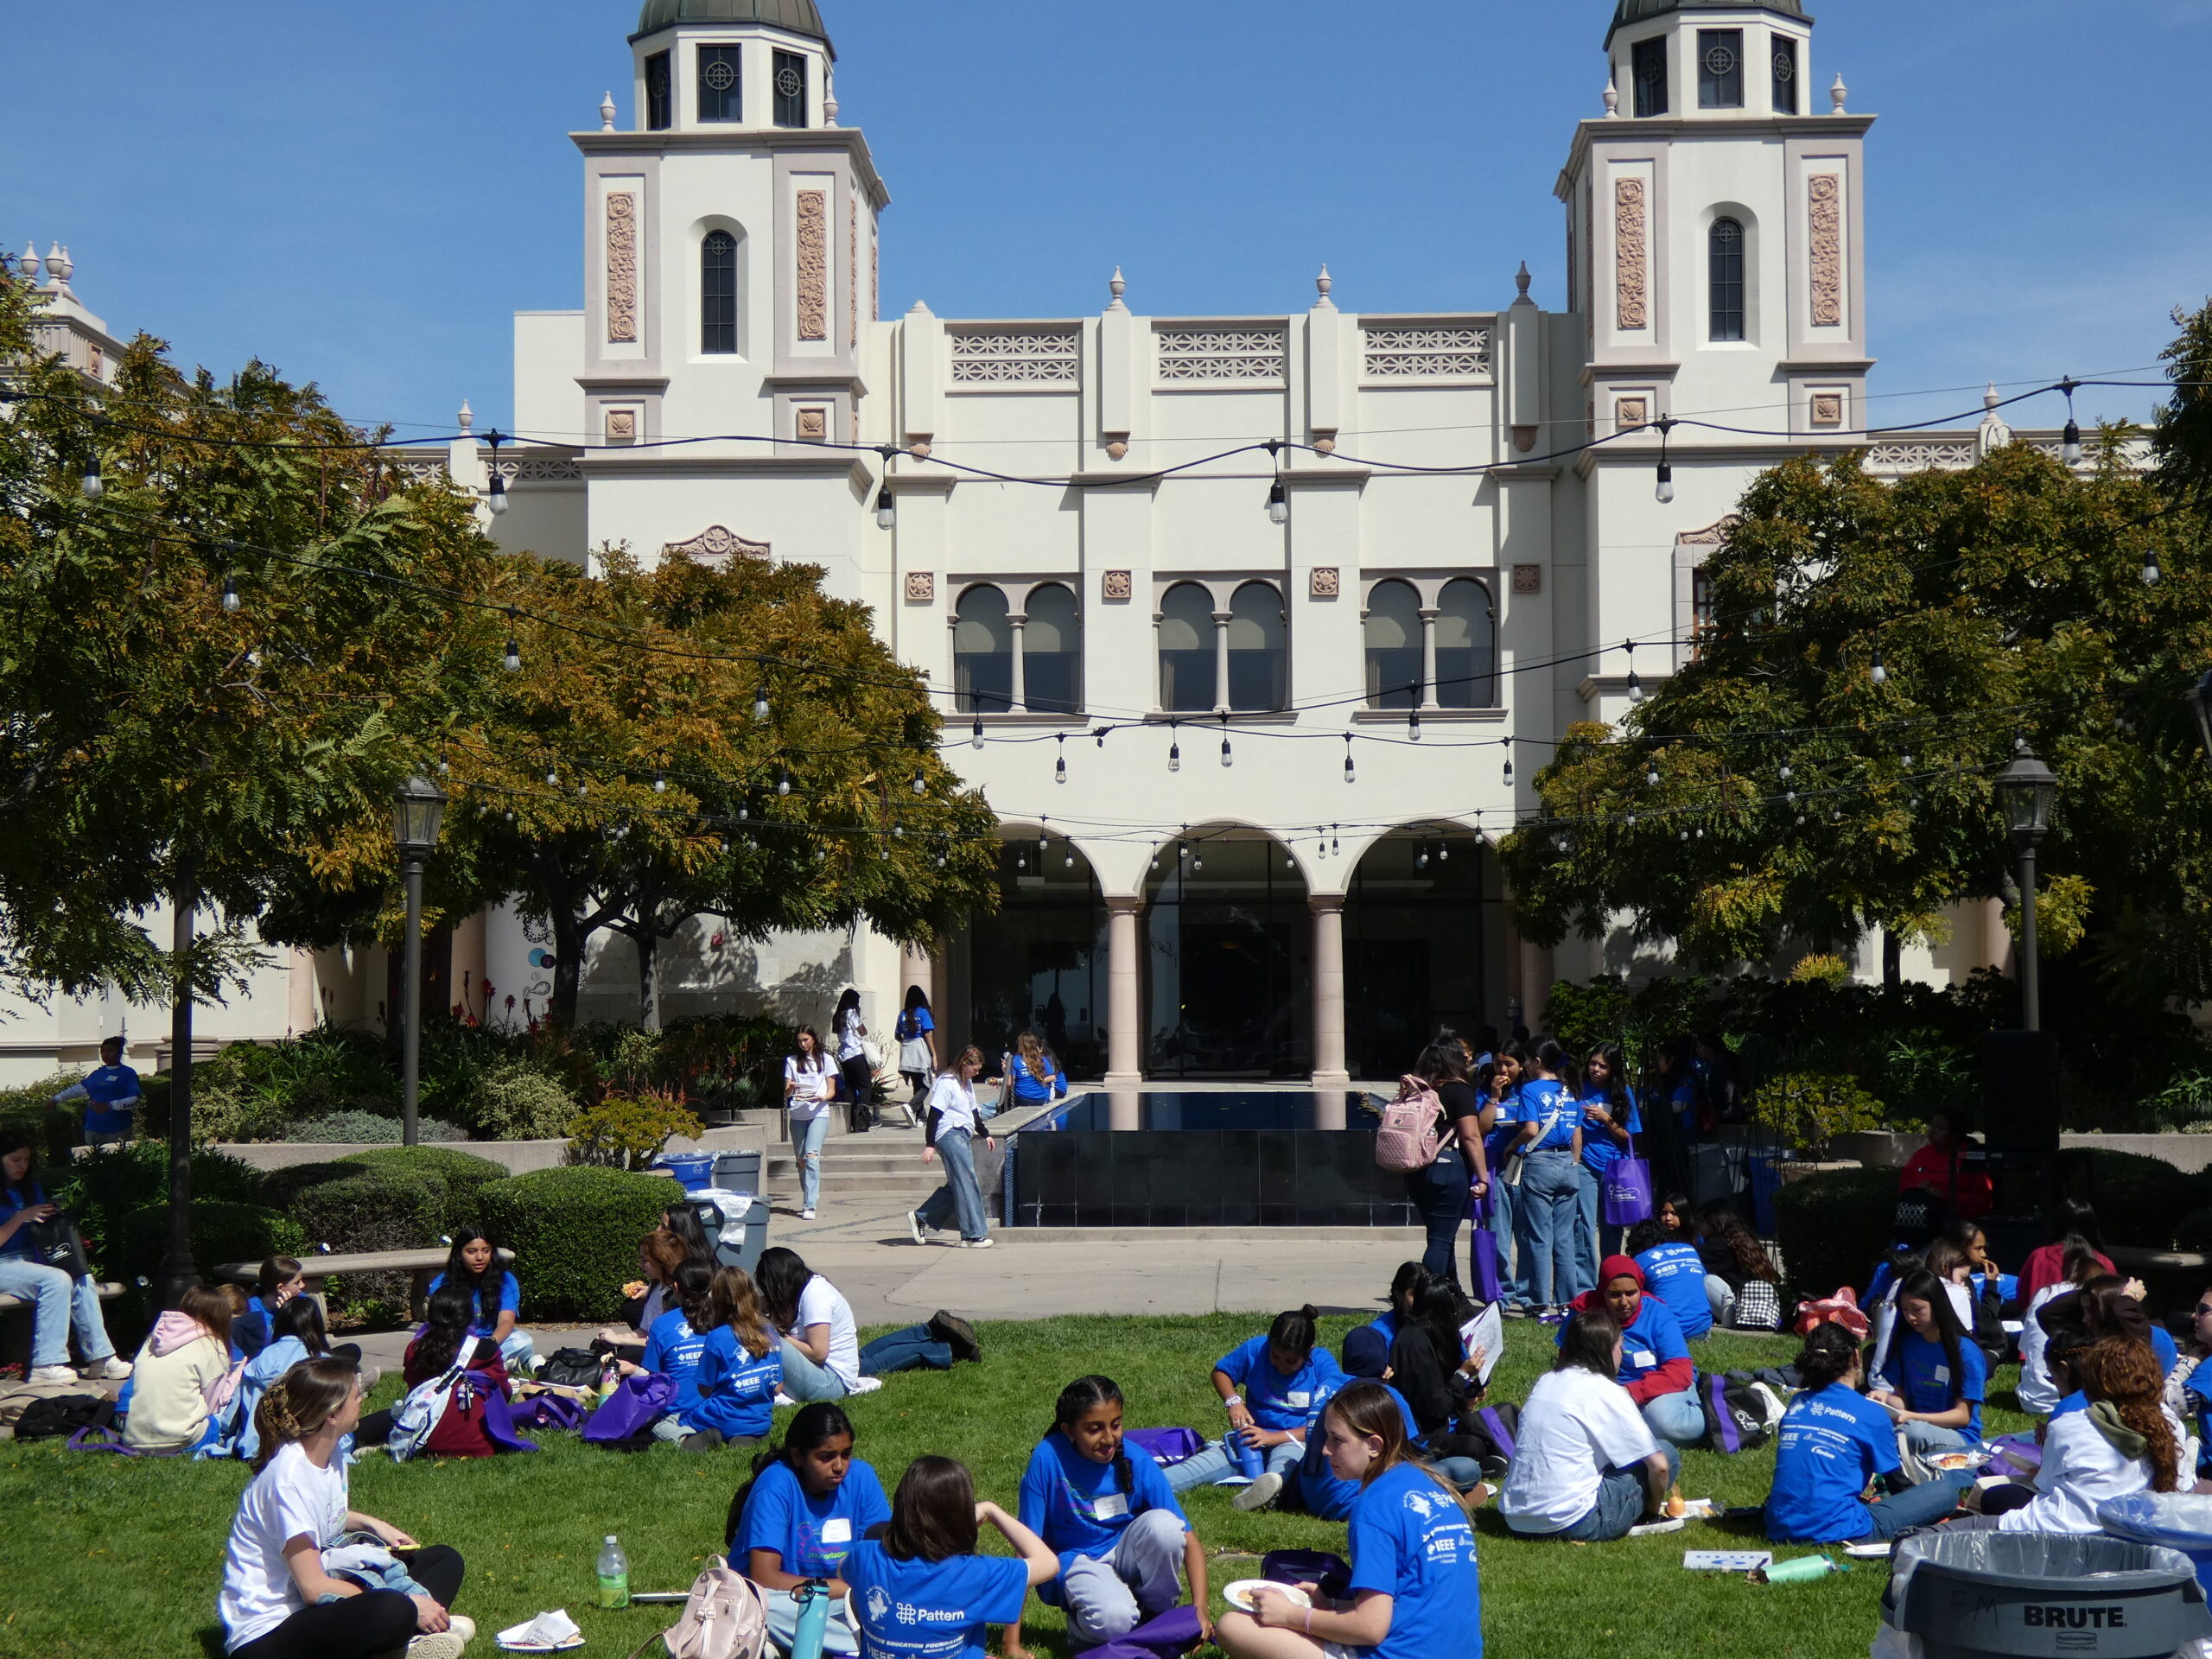 A campus with many students hanging out on the grounds in matching T-shirts.